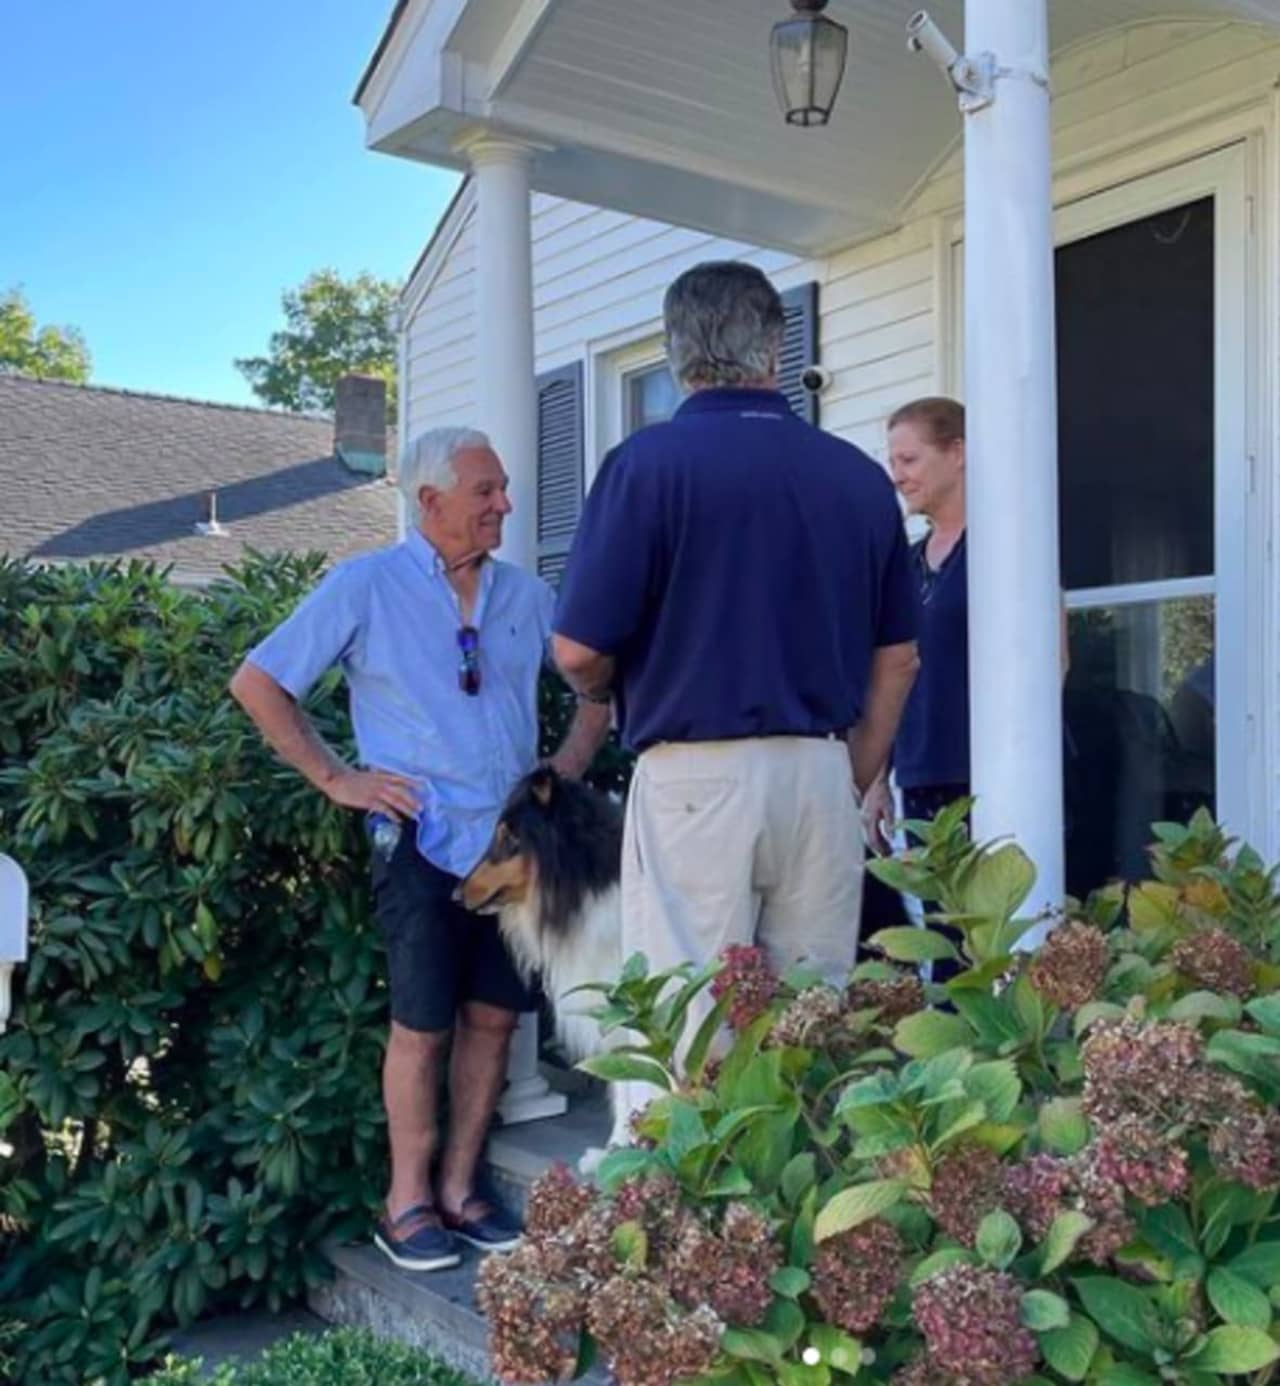 "Productive Sunday door knocking in my old neighborhood, Waterside," read the caption of this photo posted on the Instagram account of Bobby Valentine's campaign in late September.